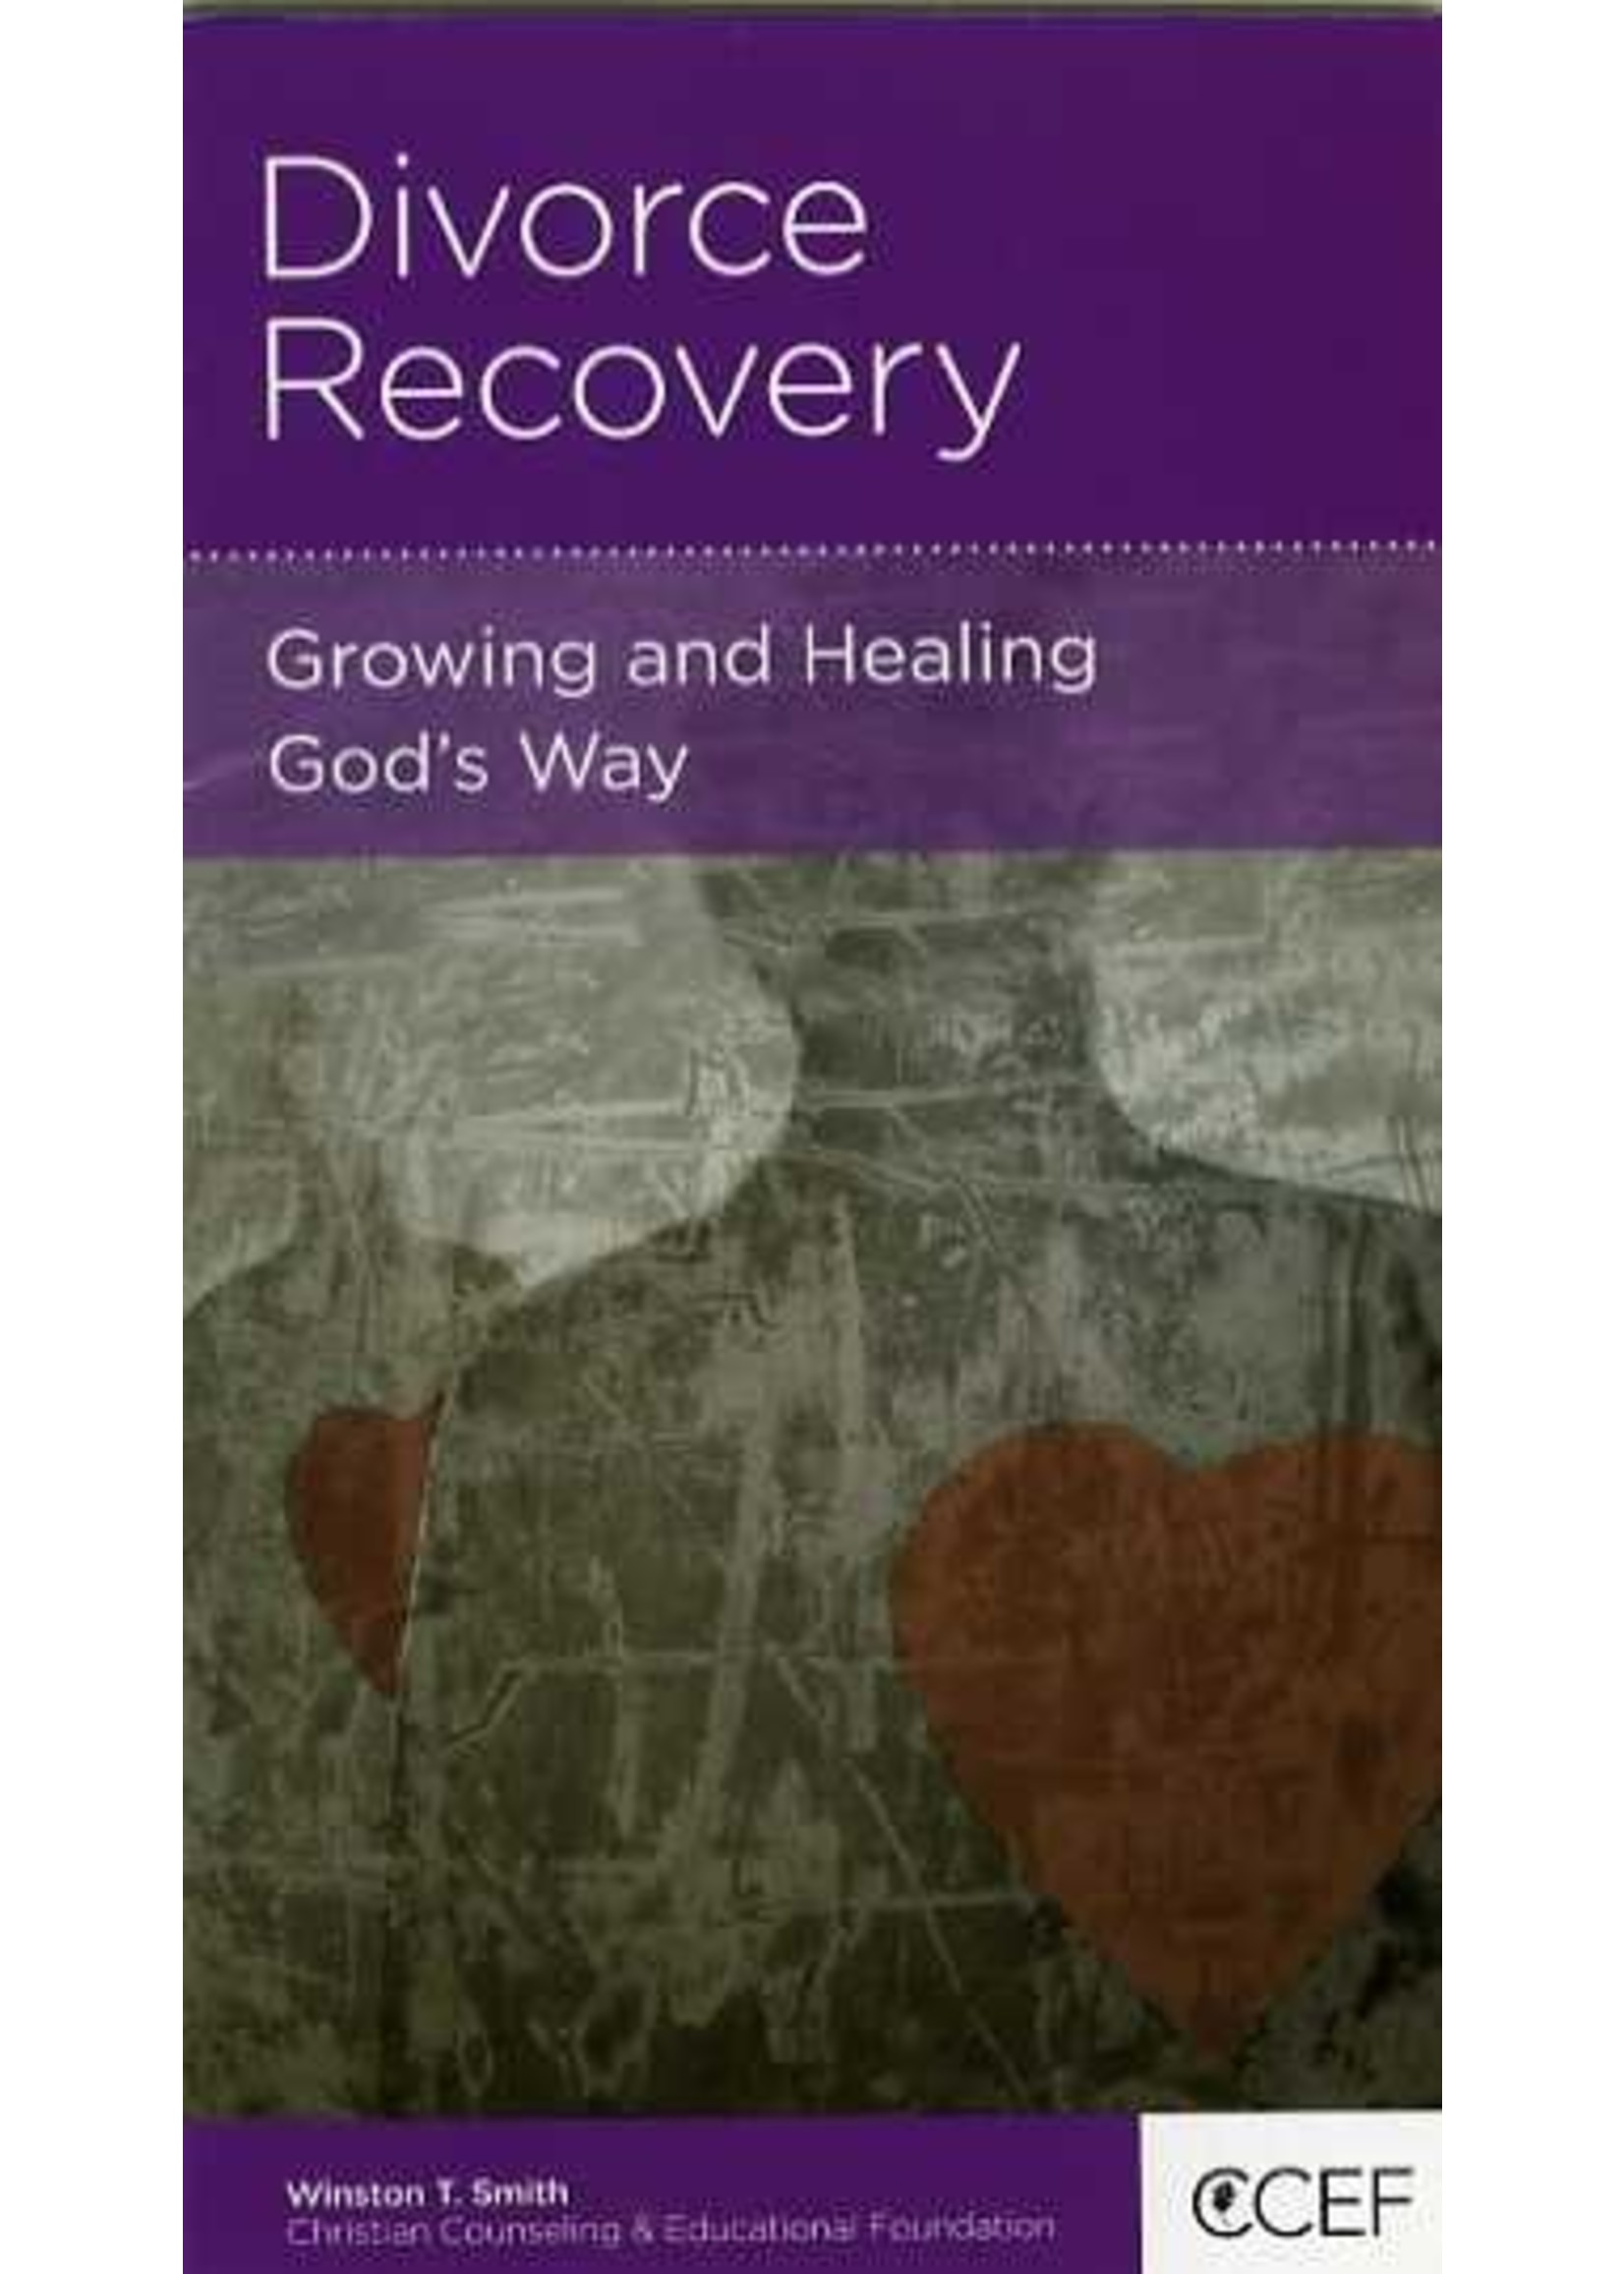 New Growth Press Divorce Recovery - Winston Smith